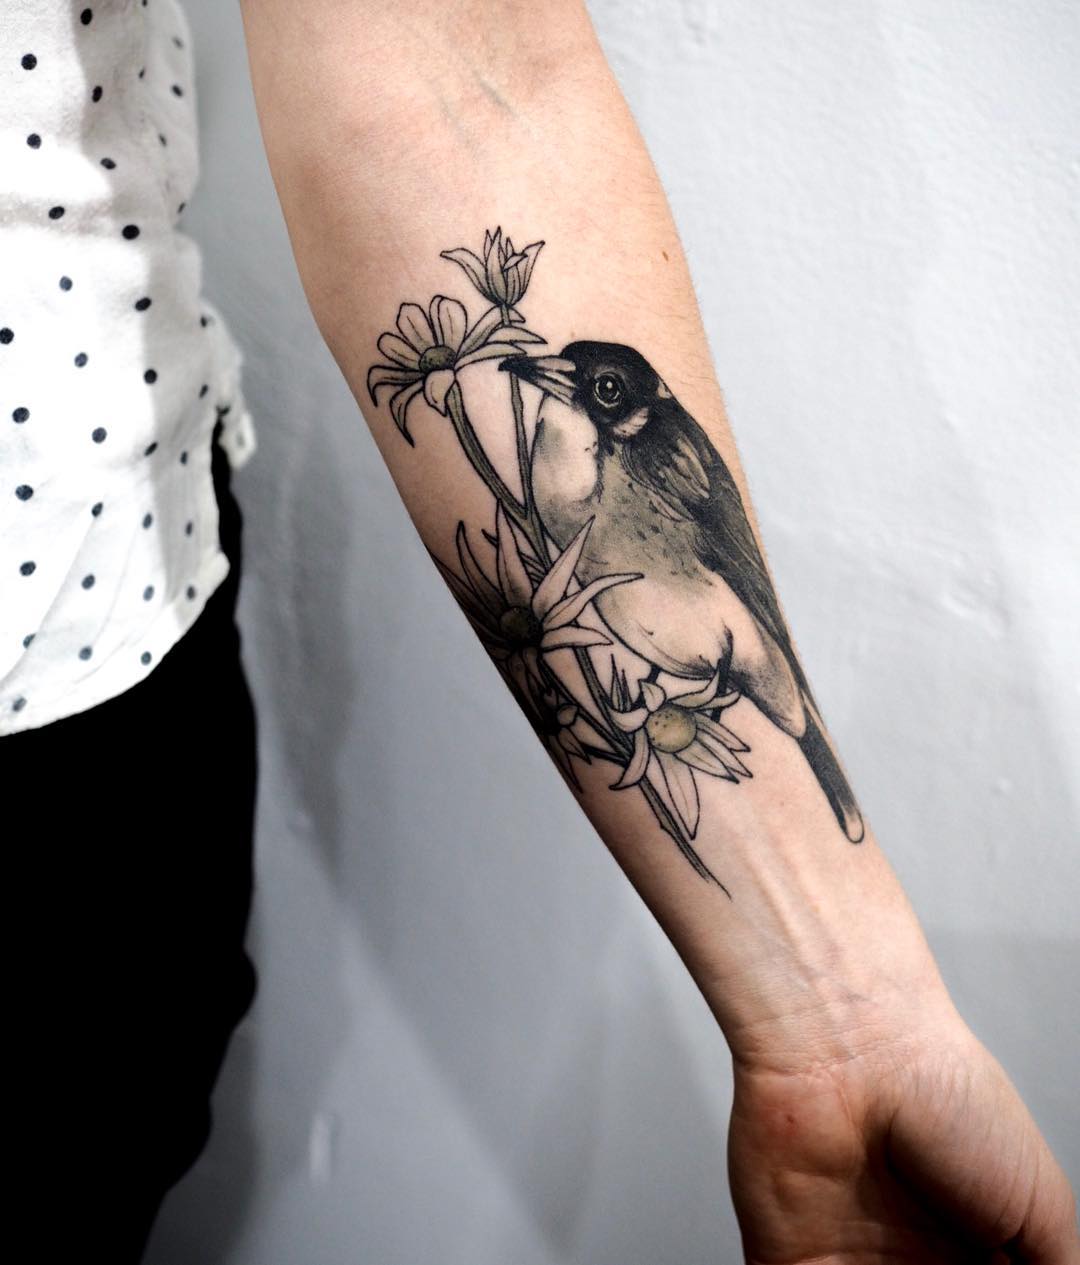 Flannel flowers and Butcherbird tattoo by @sophiabaughan